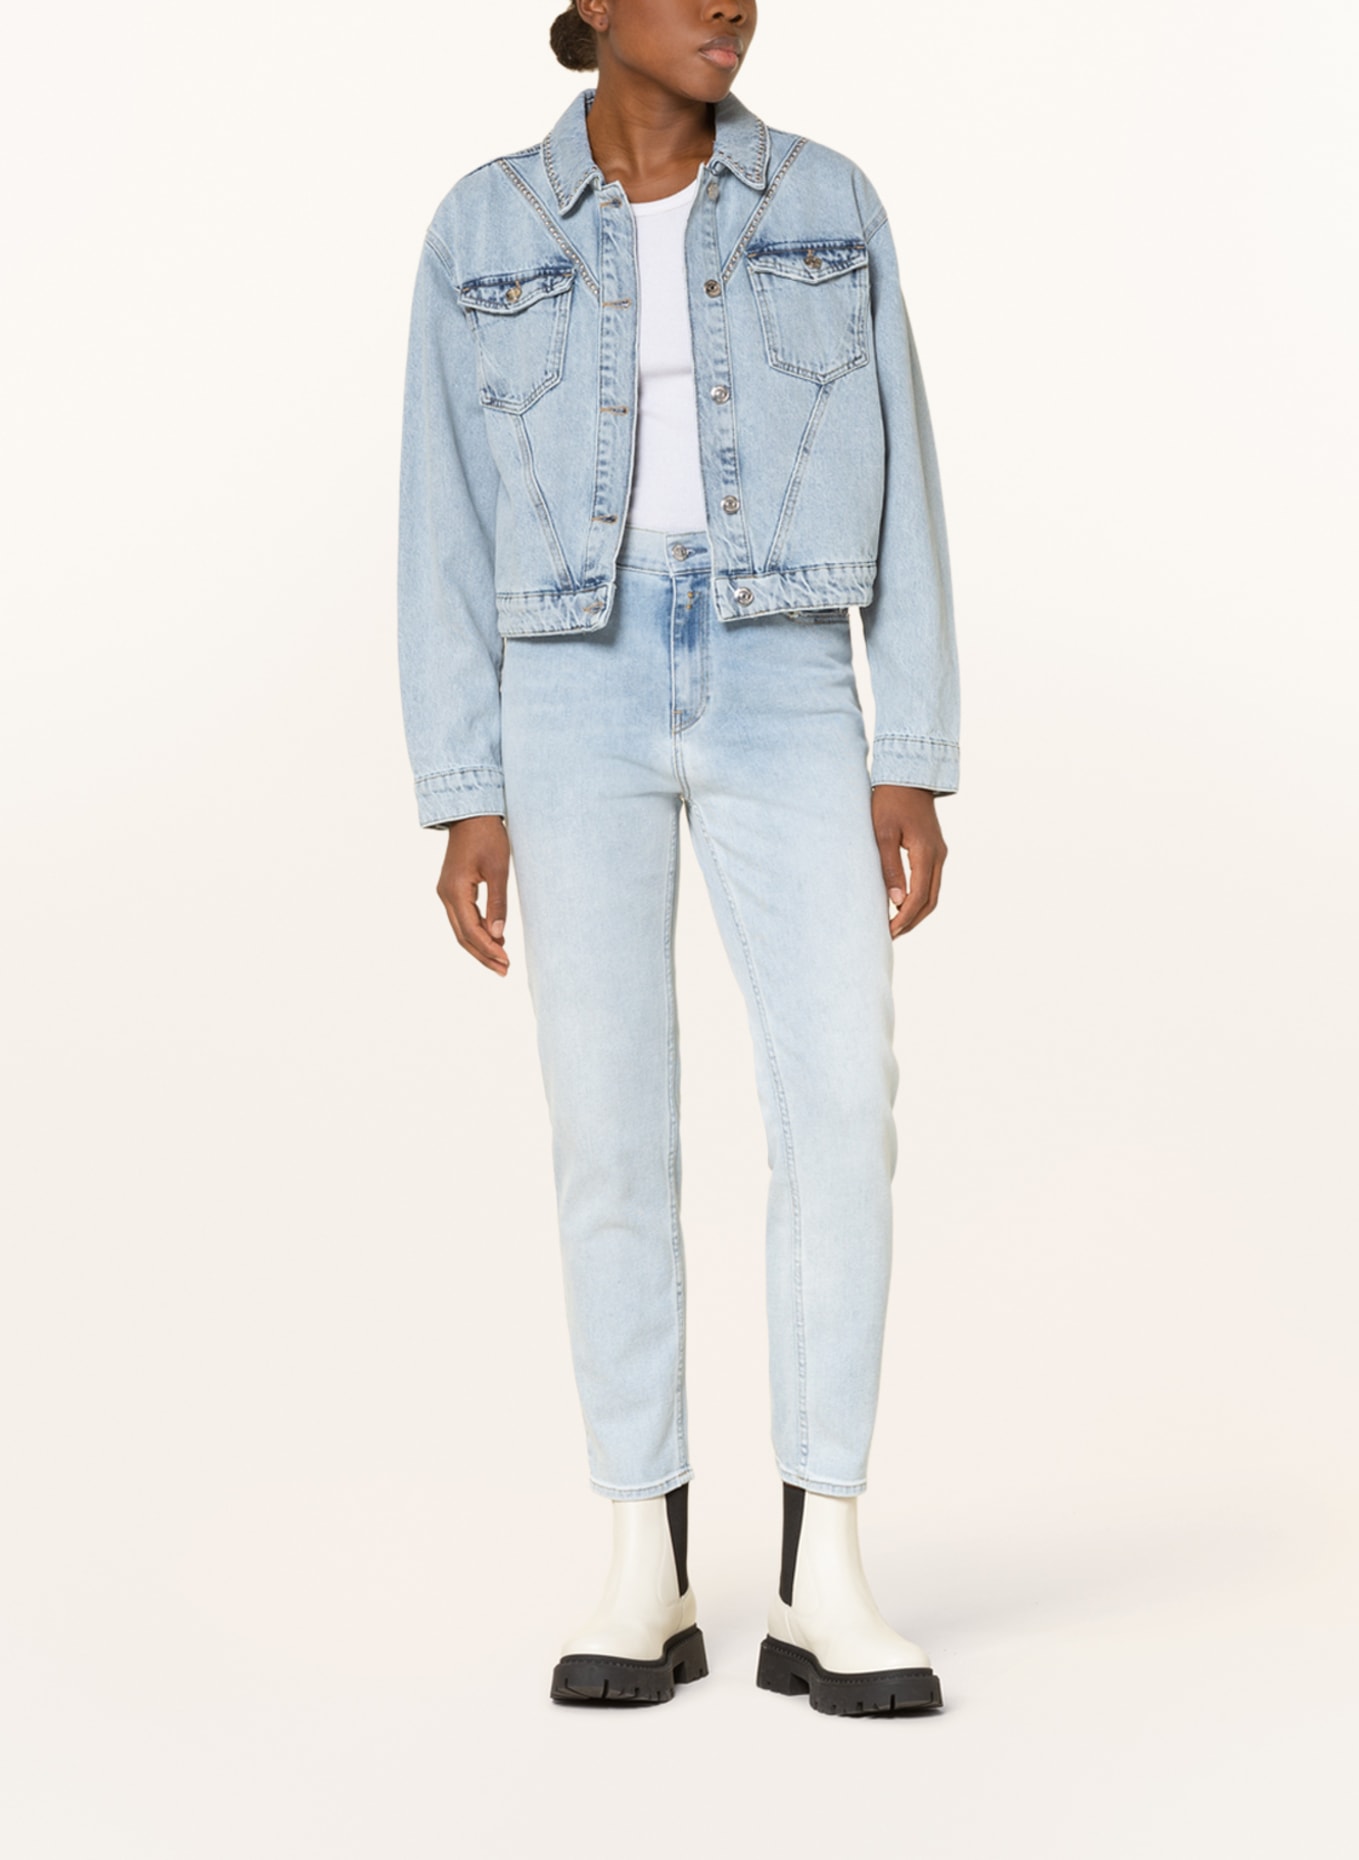 REPLAY Jeans KILEY in 011 super light blue